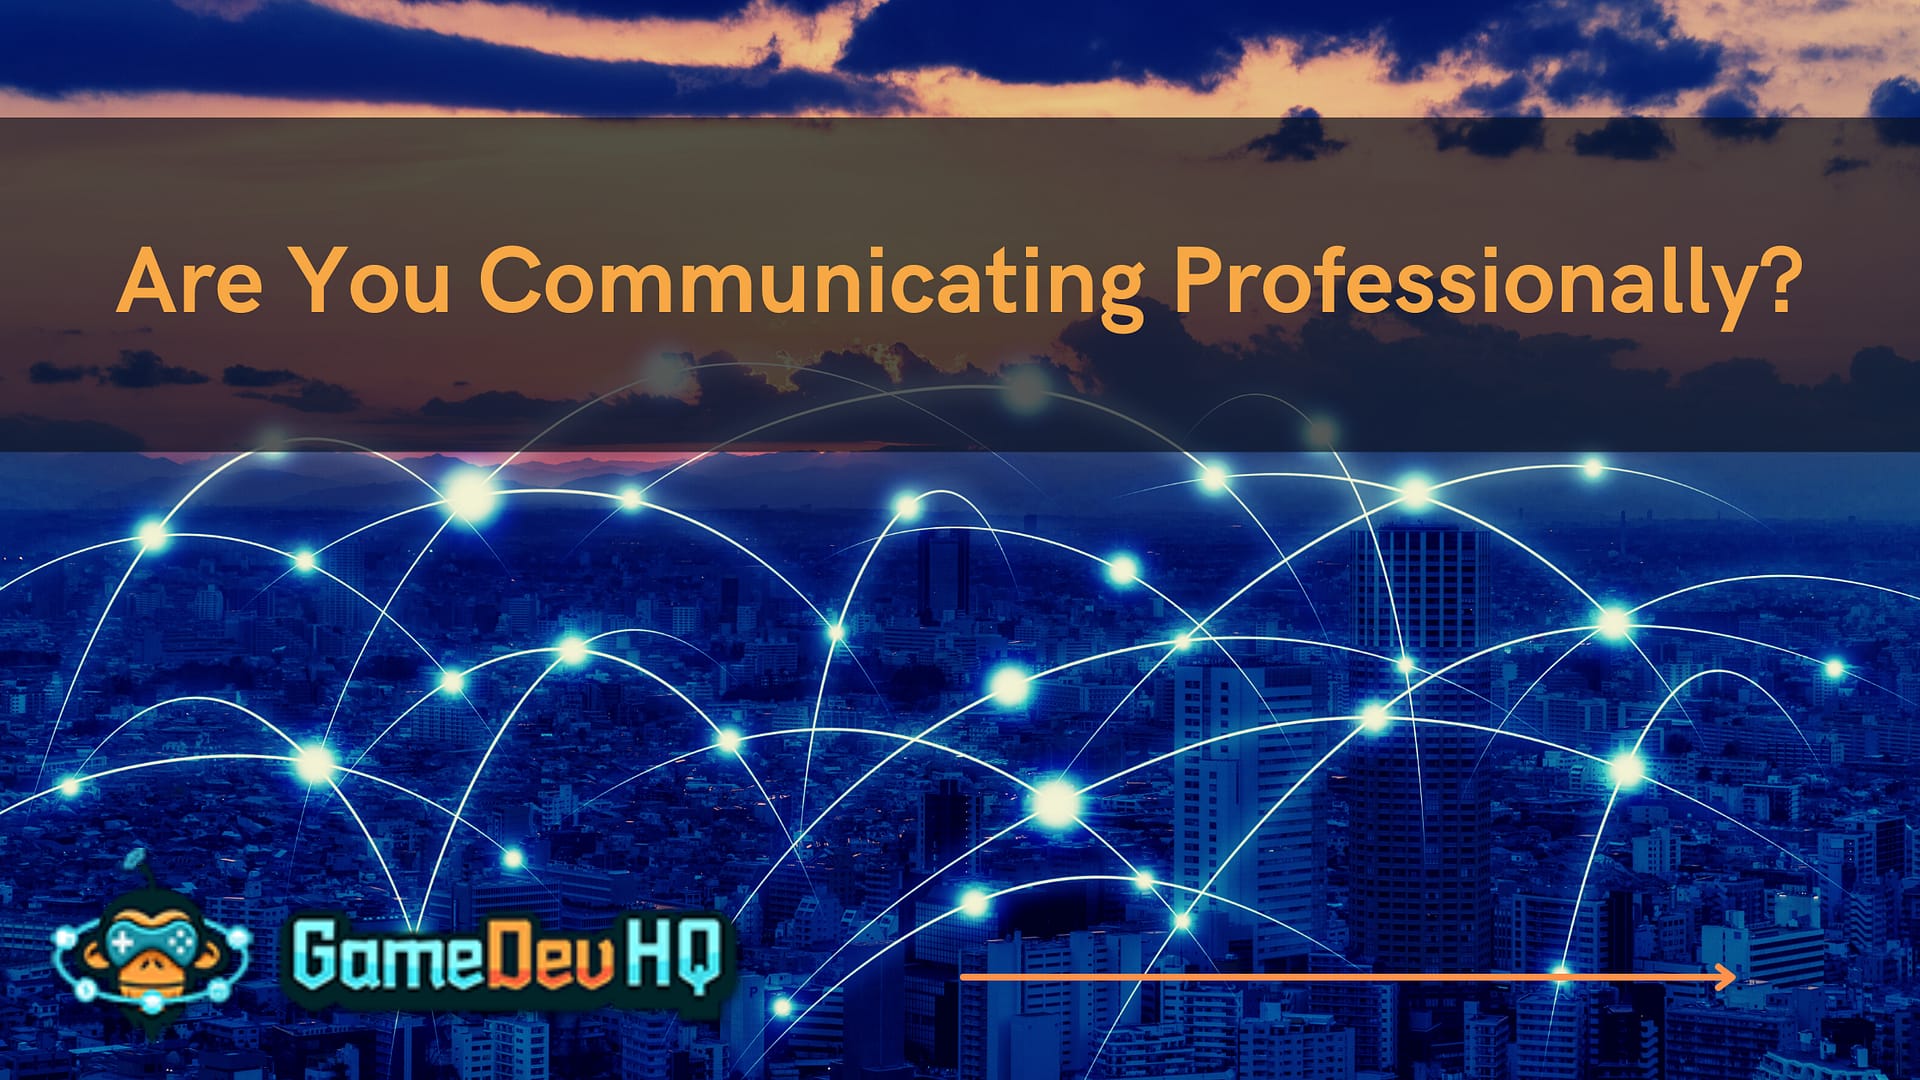 Are You Communicating Professionally?